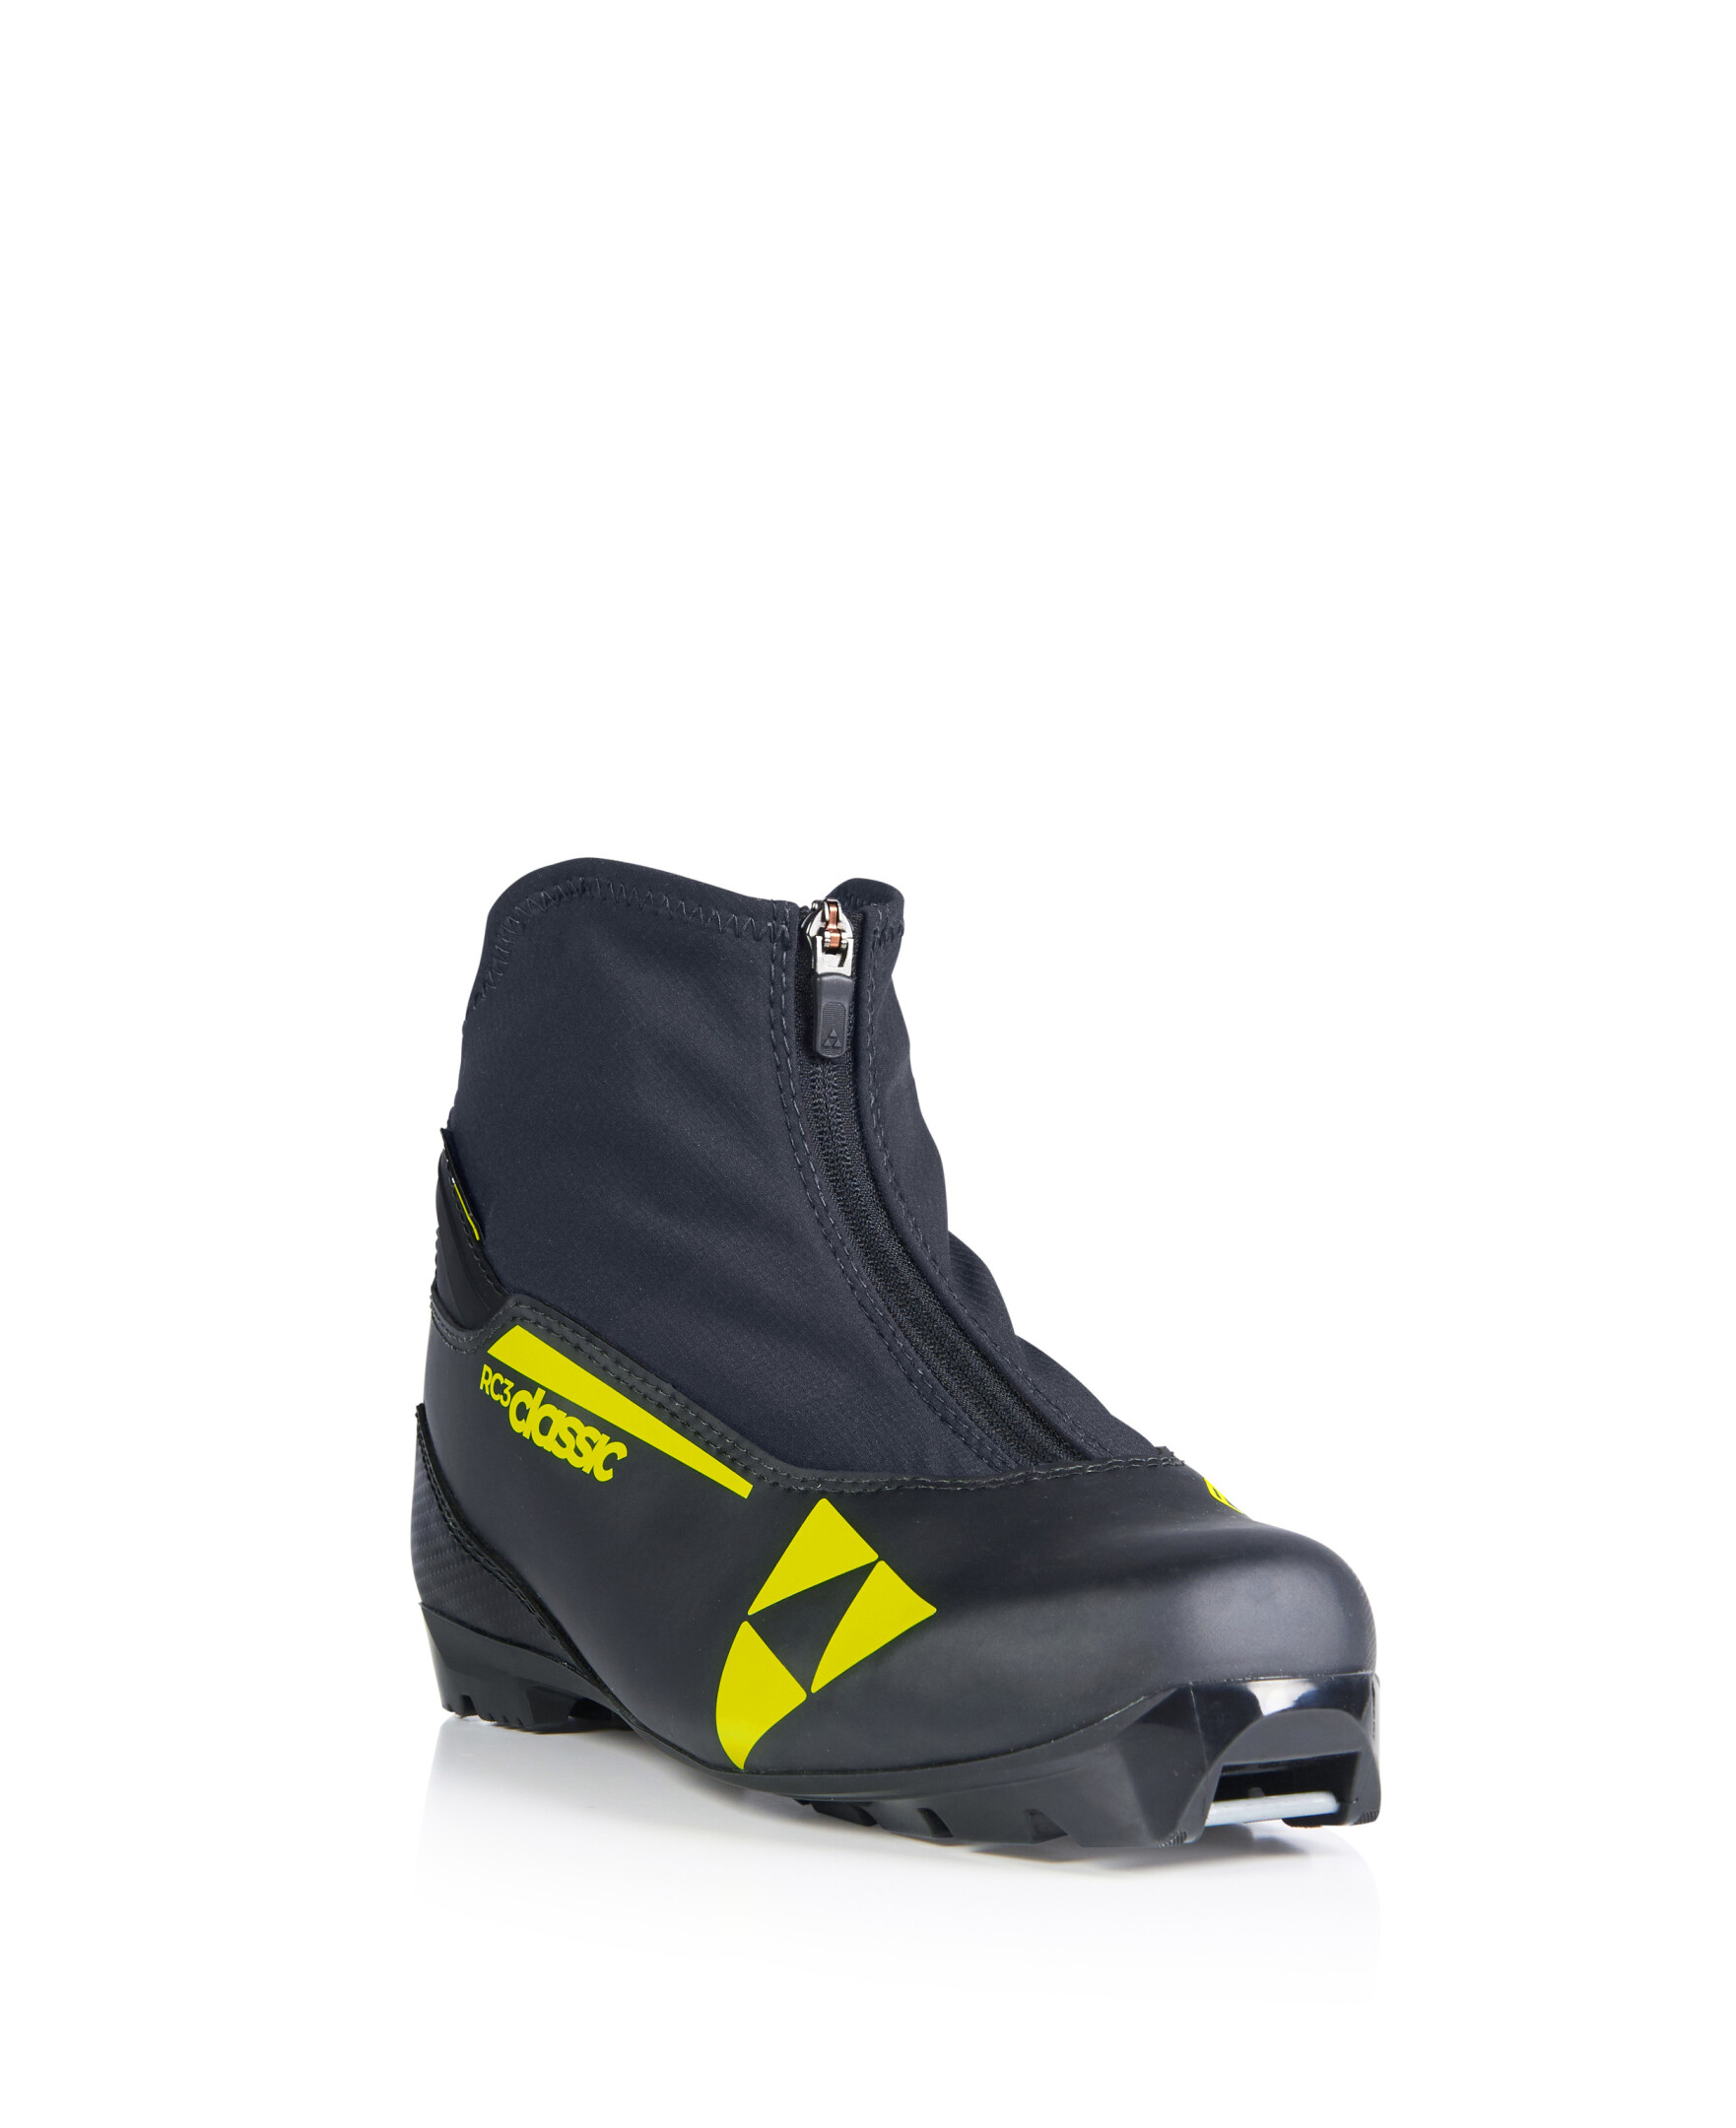 FISCHER RC3 Classic Nordic Black/Yellow Boots S17221 